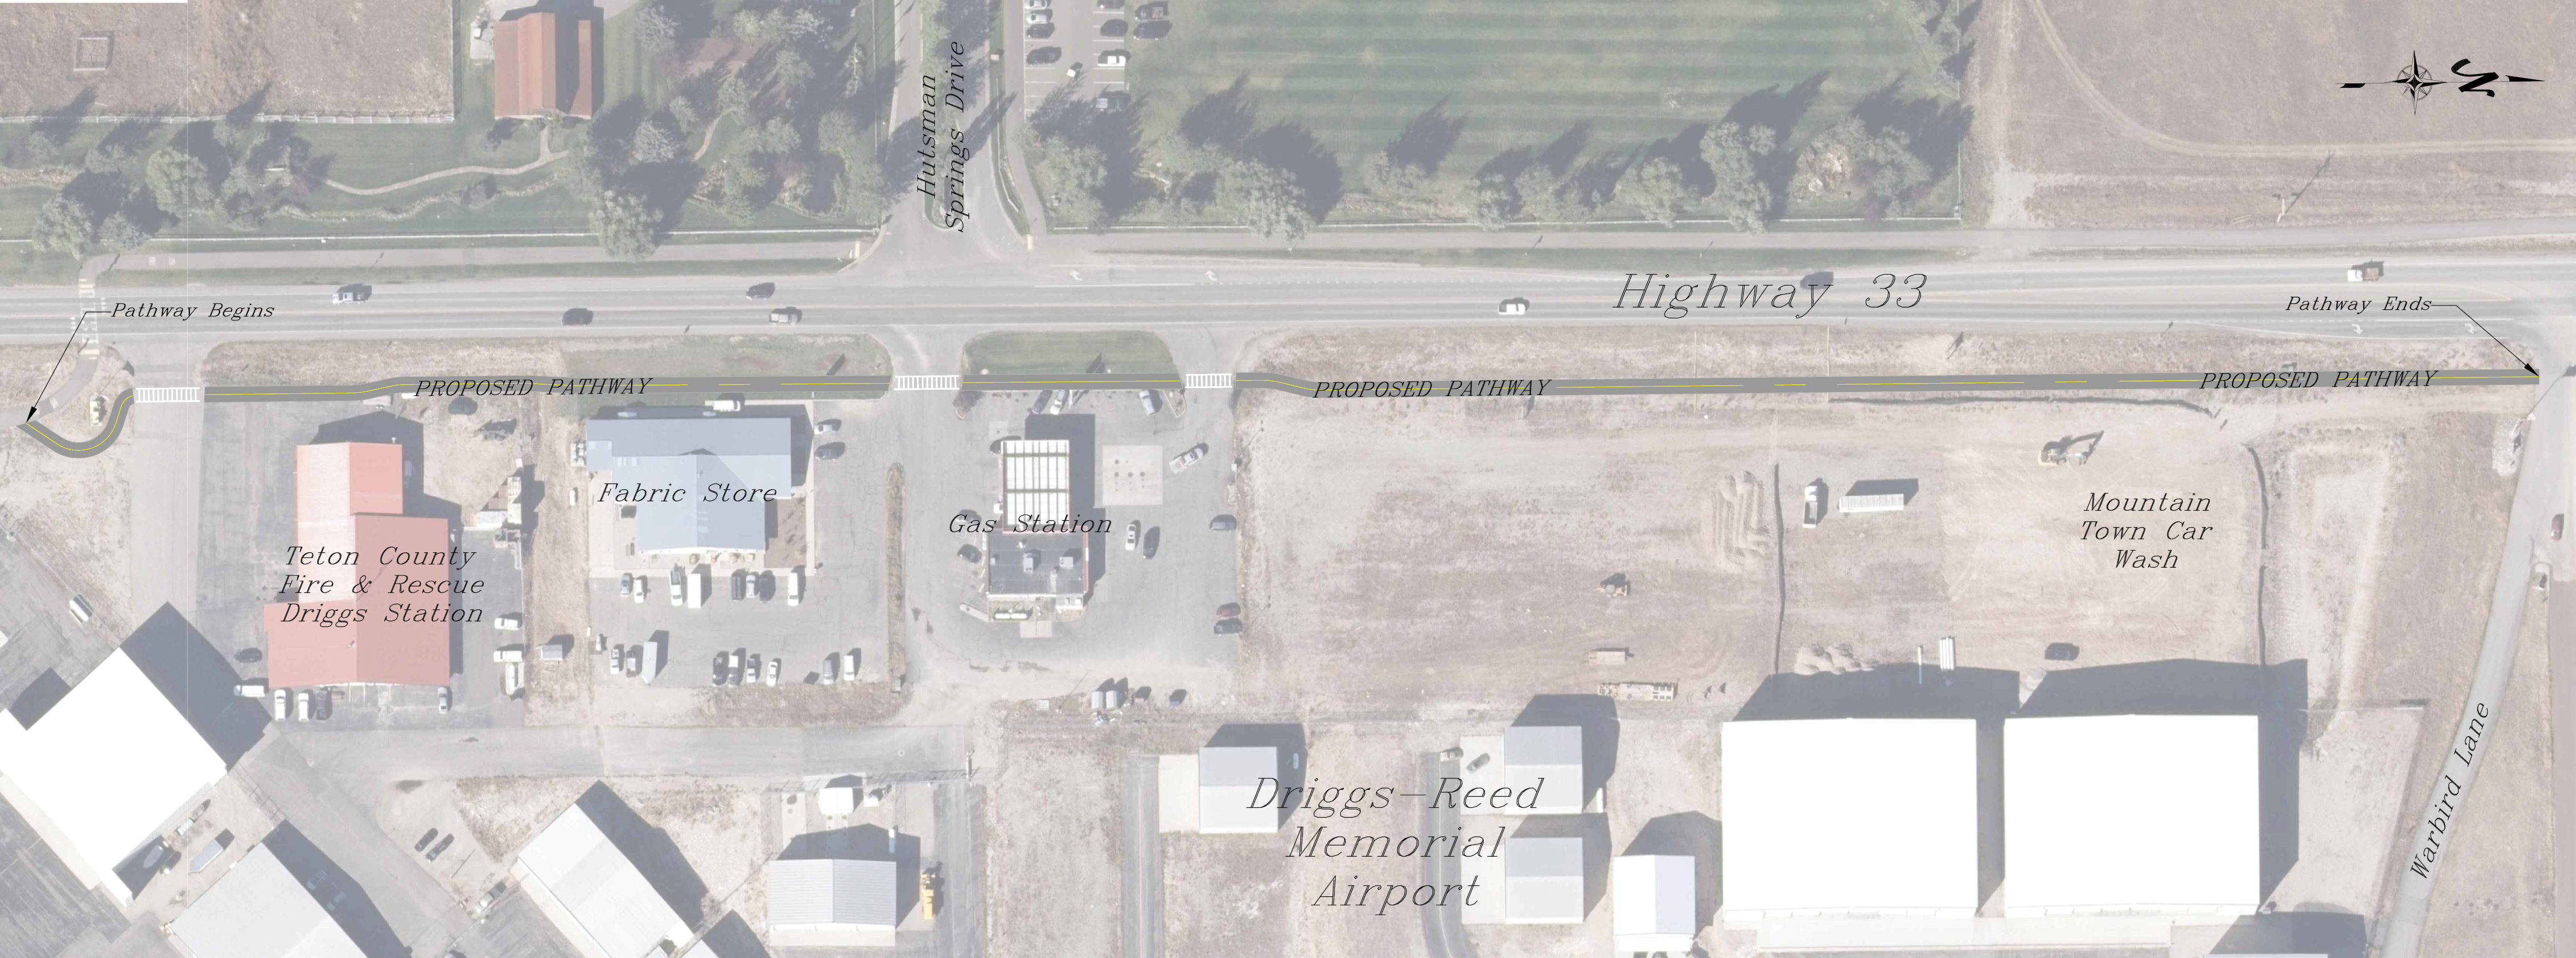 Schematic showing proposed pathway along the west side of Highway 33 near the Driggs-Reed Memorial Airport